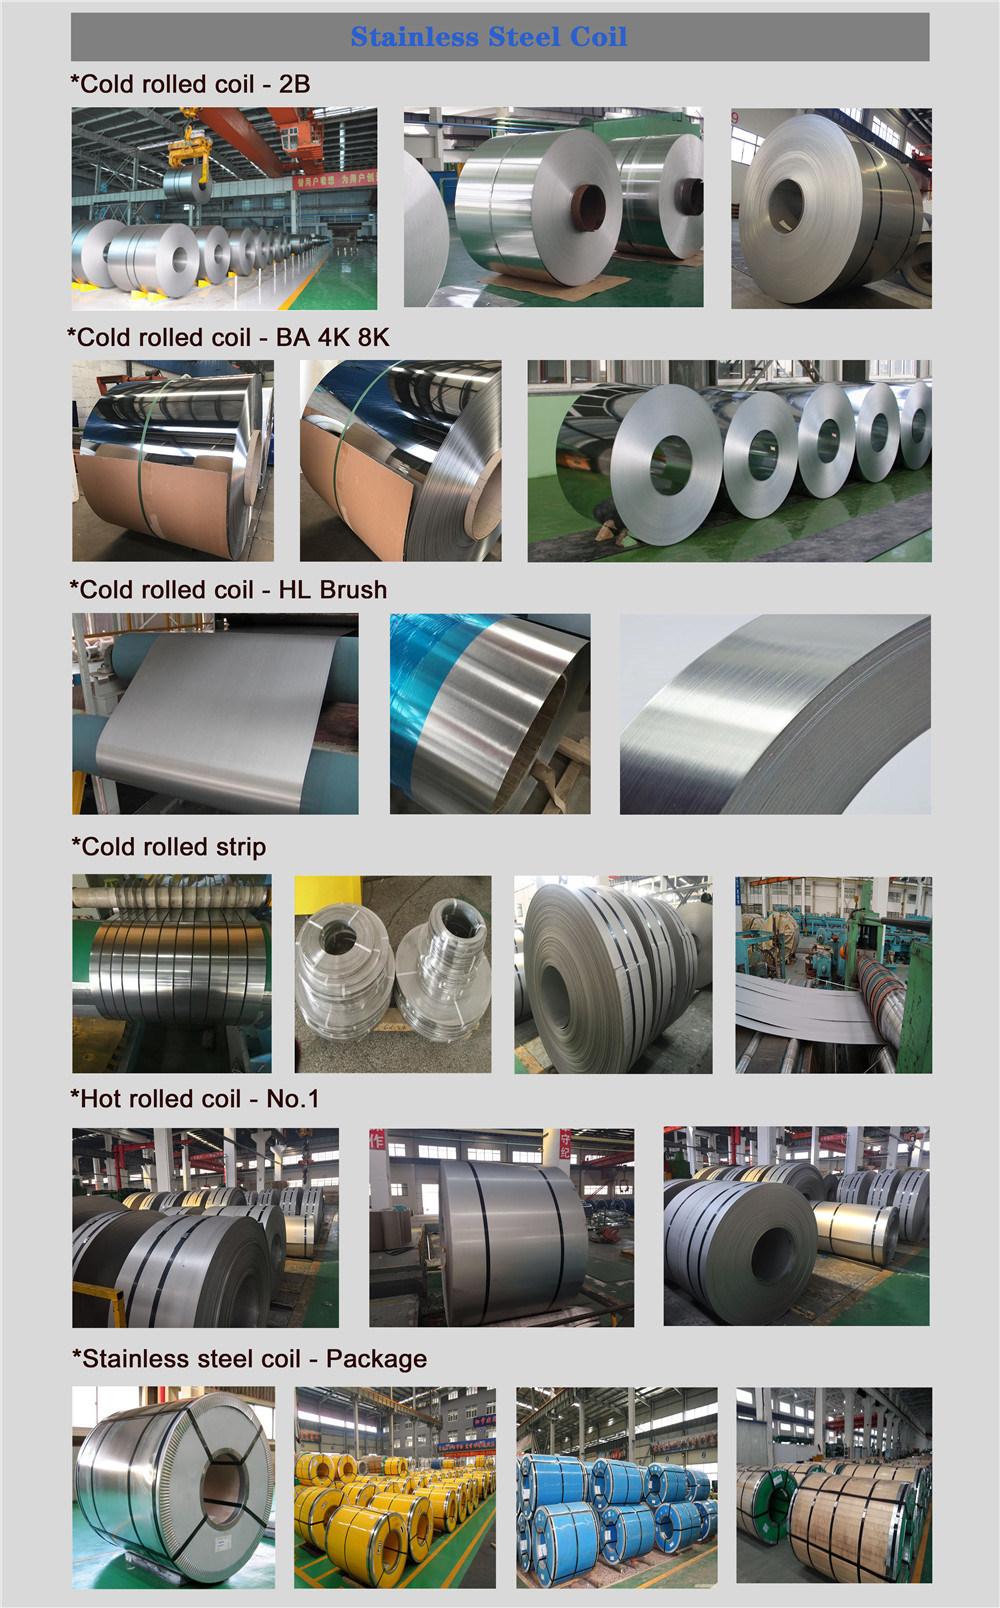 Wgolesale Tisco 304 304L Coil ASTM AISI SUS Ss 201 202 301 304 304L 309S 316 316L 409 410s 410 Hot Rolled No. 1 Stainless Steel Strips / Coil for Industy